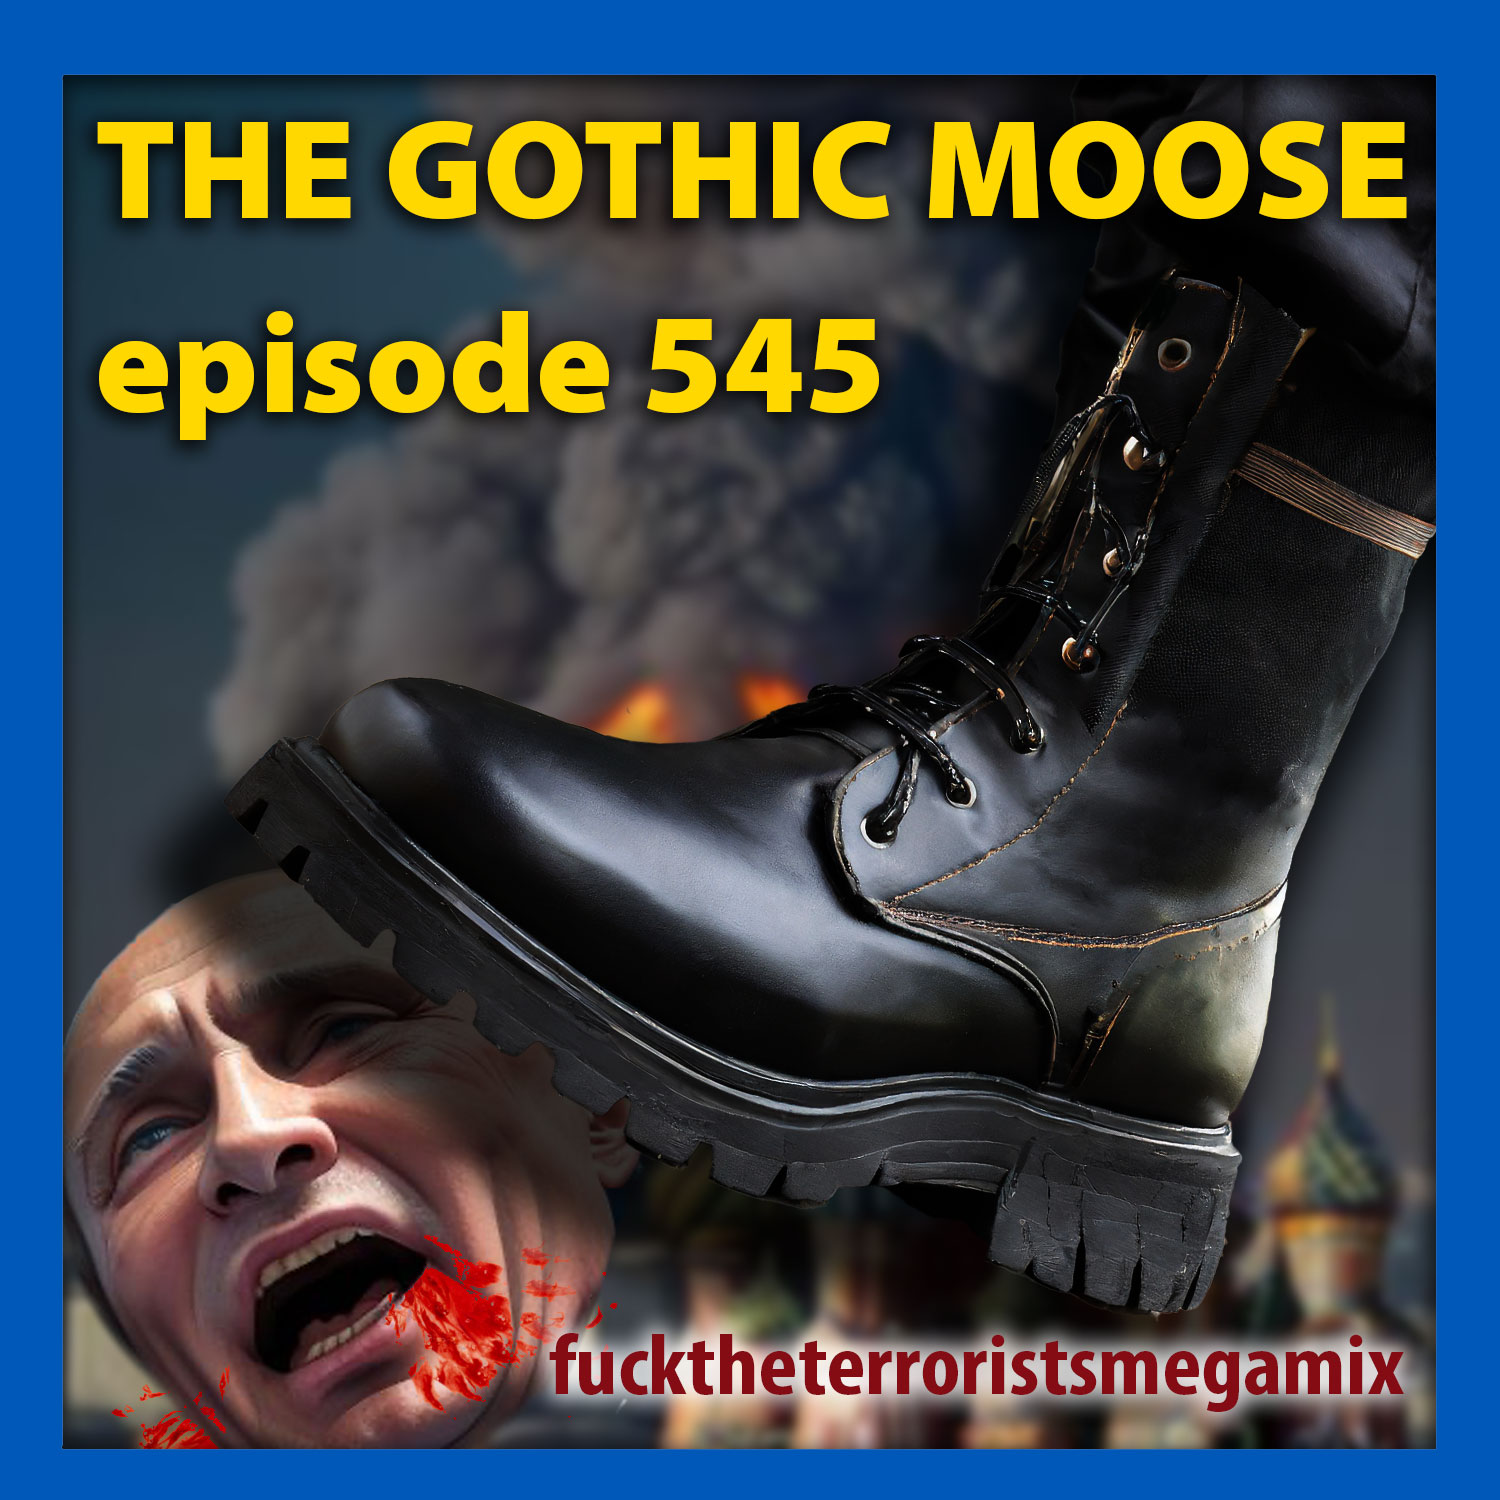 The Gothic Moose – Episode 545 – All Ukrainian bands or bands supporting Ukraine